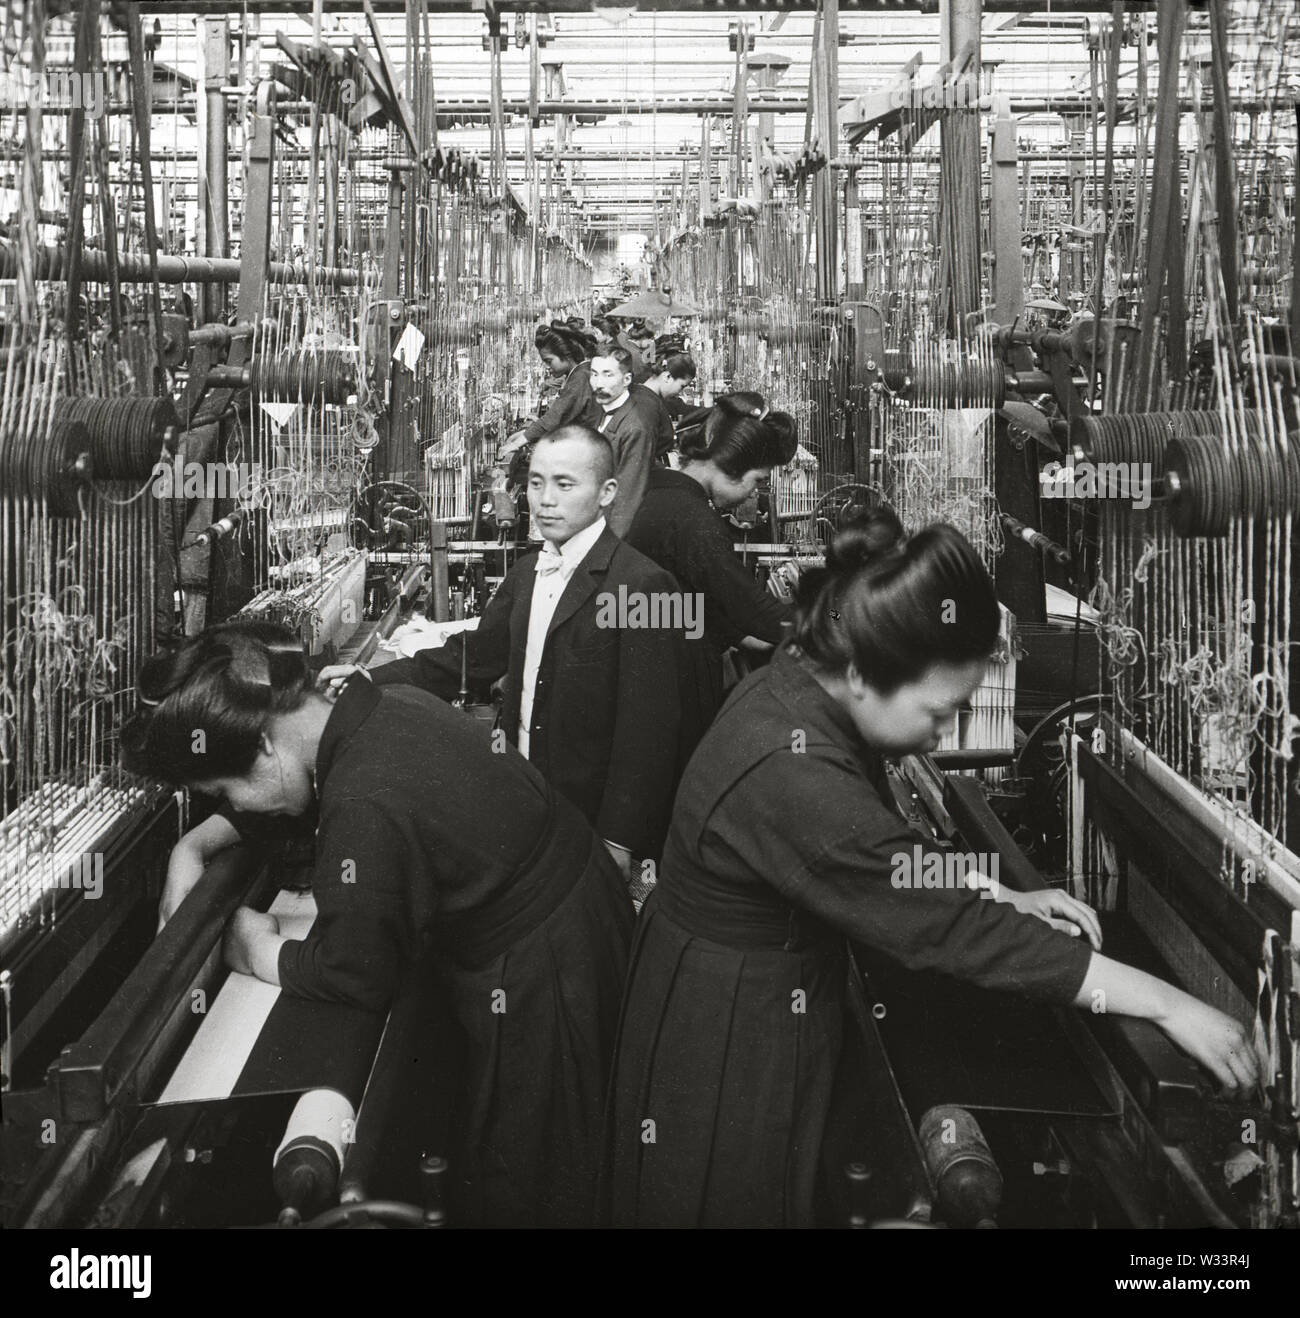 [ 1900s Japan - Japanese Silk Factory ] —   A man in suit looks on as women in uniform are weaving silk at the Kiryu Orimono KK (桐生織物株式会社, Kiryu Textile Company Ltd.), a Japanese silk factory in Kiryu, Gunma Prefecture. The company was launched as the Nihon Orimono KK (日本織物株式会社, Japan Textile Company, Ltd.) in 1887 (Meiji 20). At the time it was Japan’s largest and most modern silk factory where the complete production process was done by machinery.  20th century vintage glass slide. Stock Photo